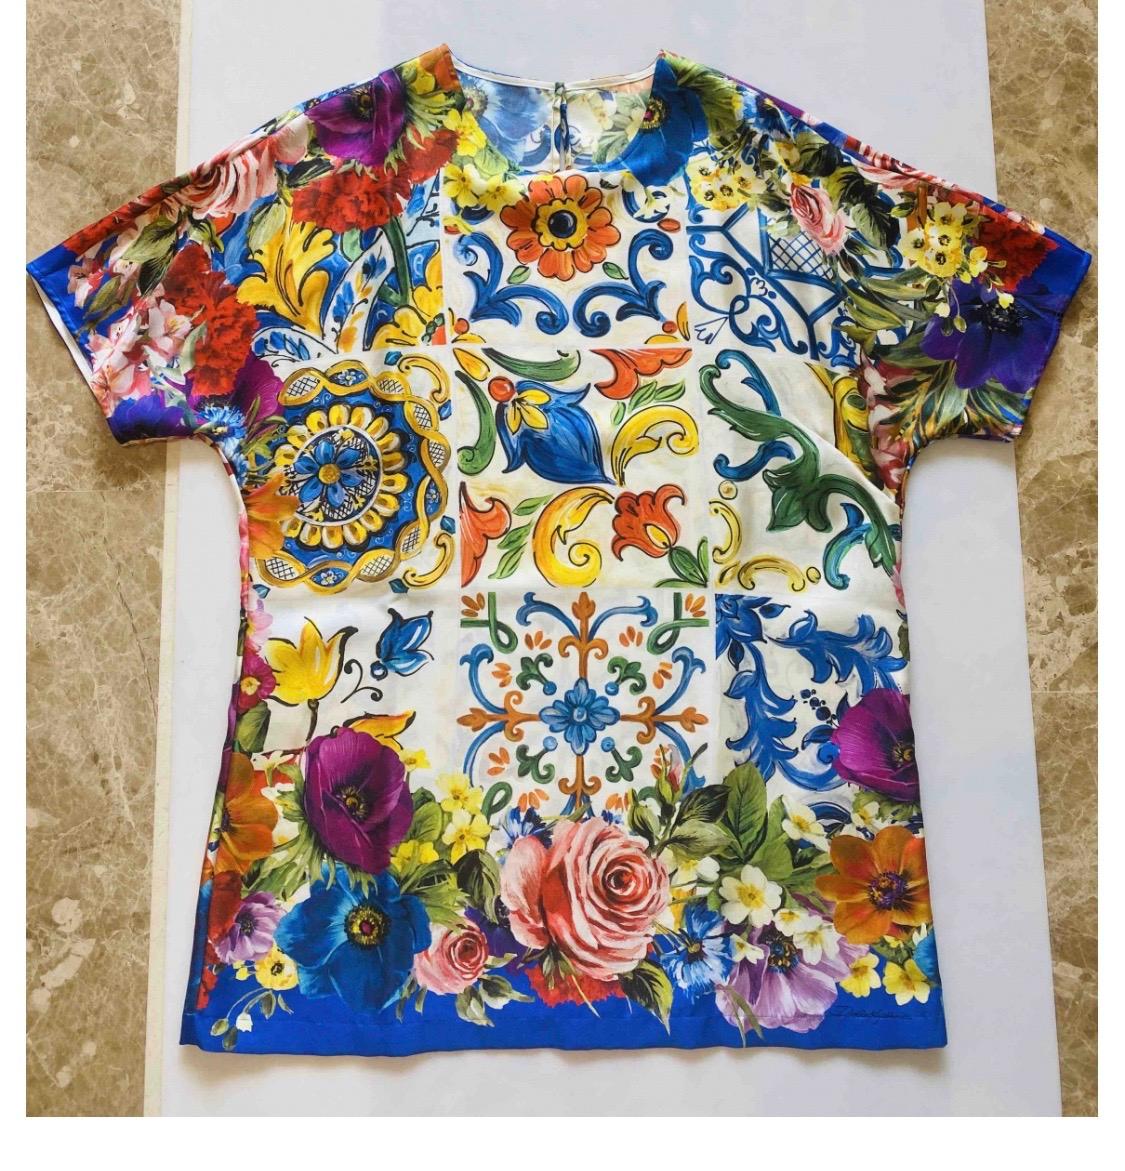 Dolce & Gabbana Sicily Maiolica
Rose Floral printed silk top T-shirt
blouse

Size 44IT UK12, L.
100% silk
Brand new with tags!

Please check my other DG clothing,
beachwear, shoes & accessories in this
beautiful print!
